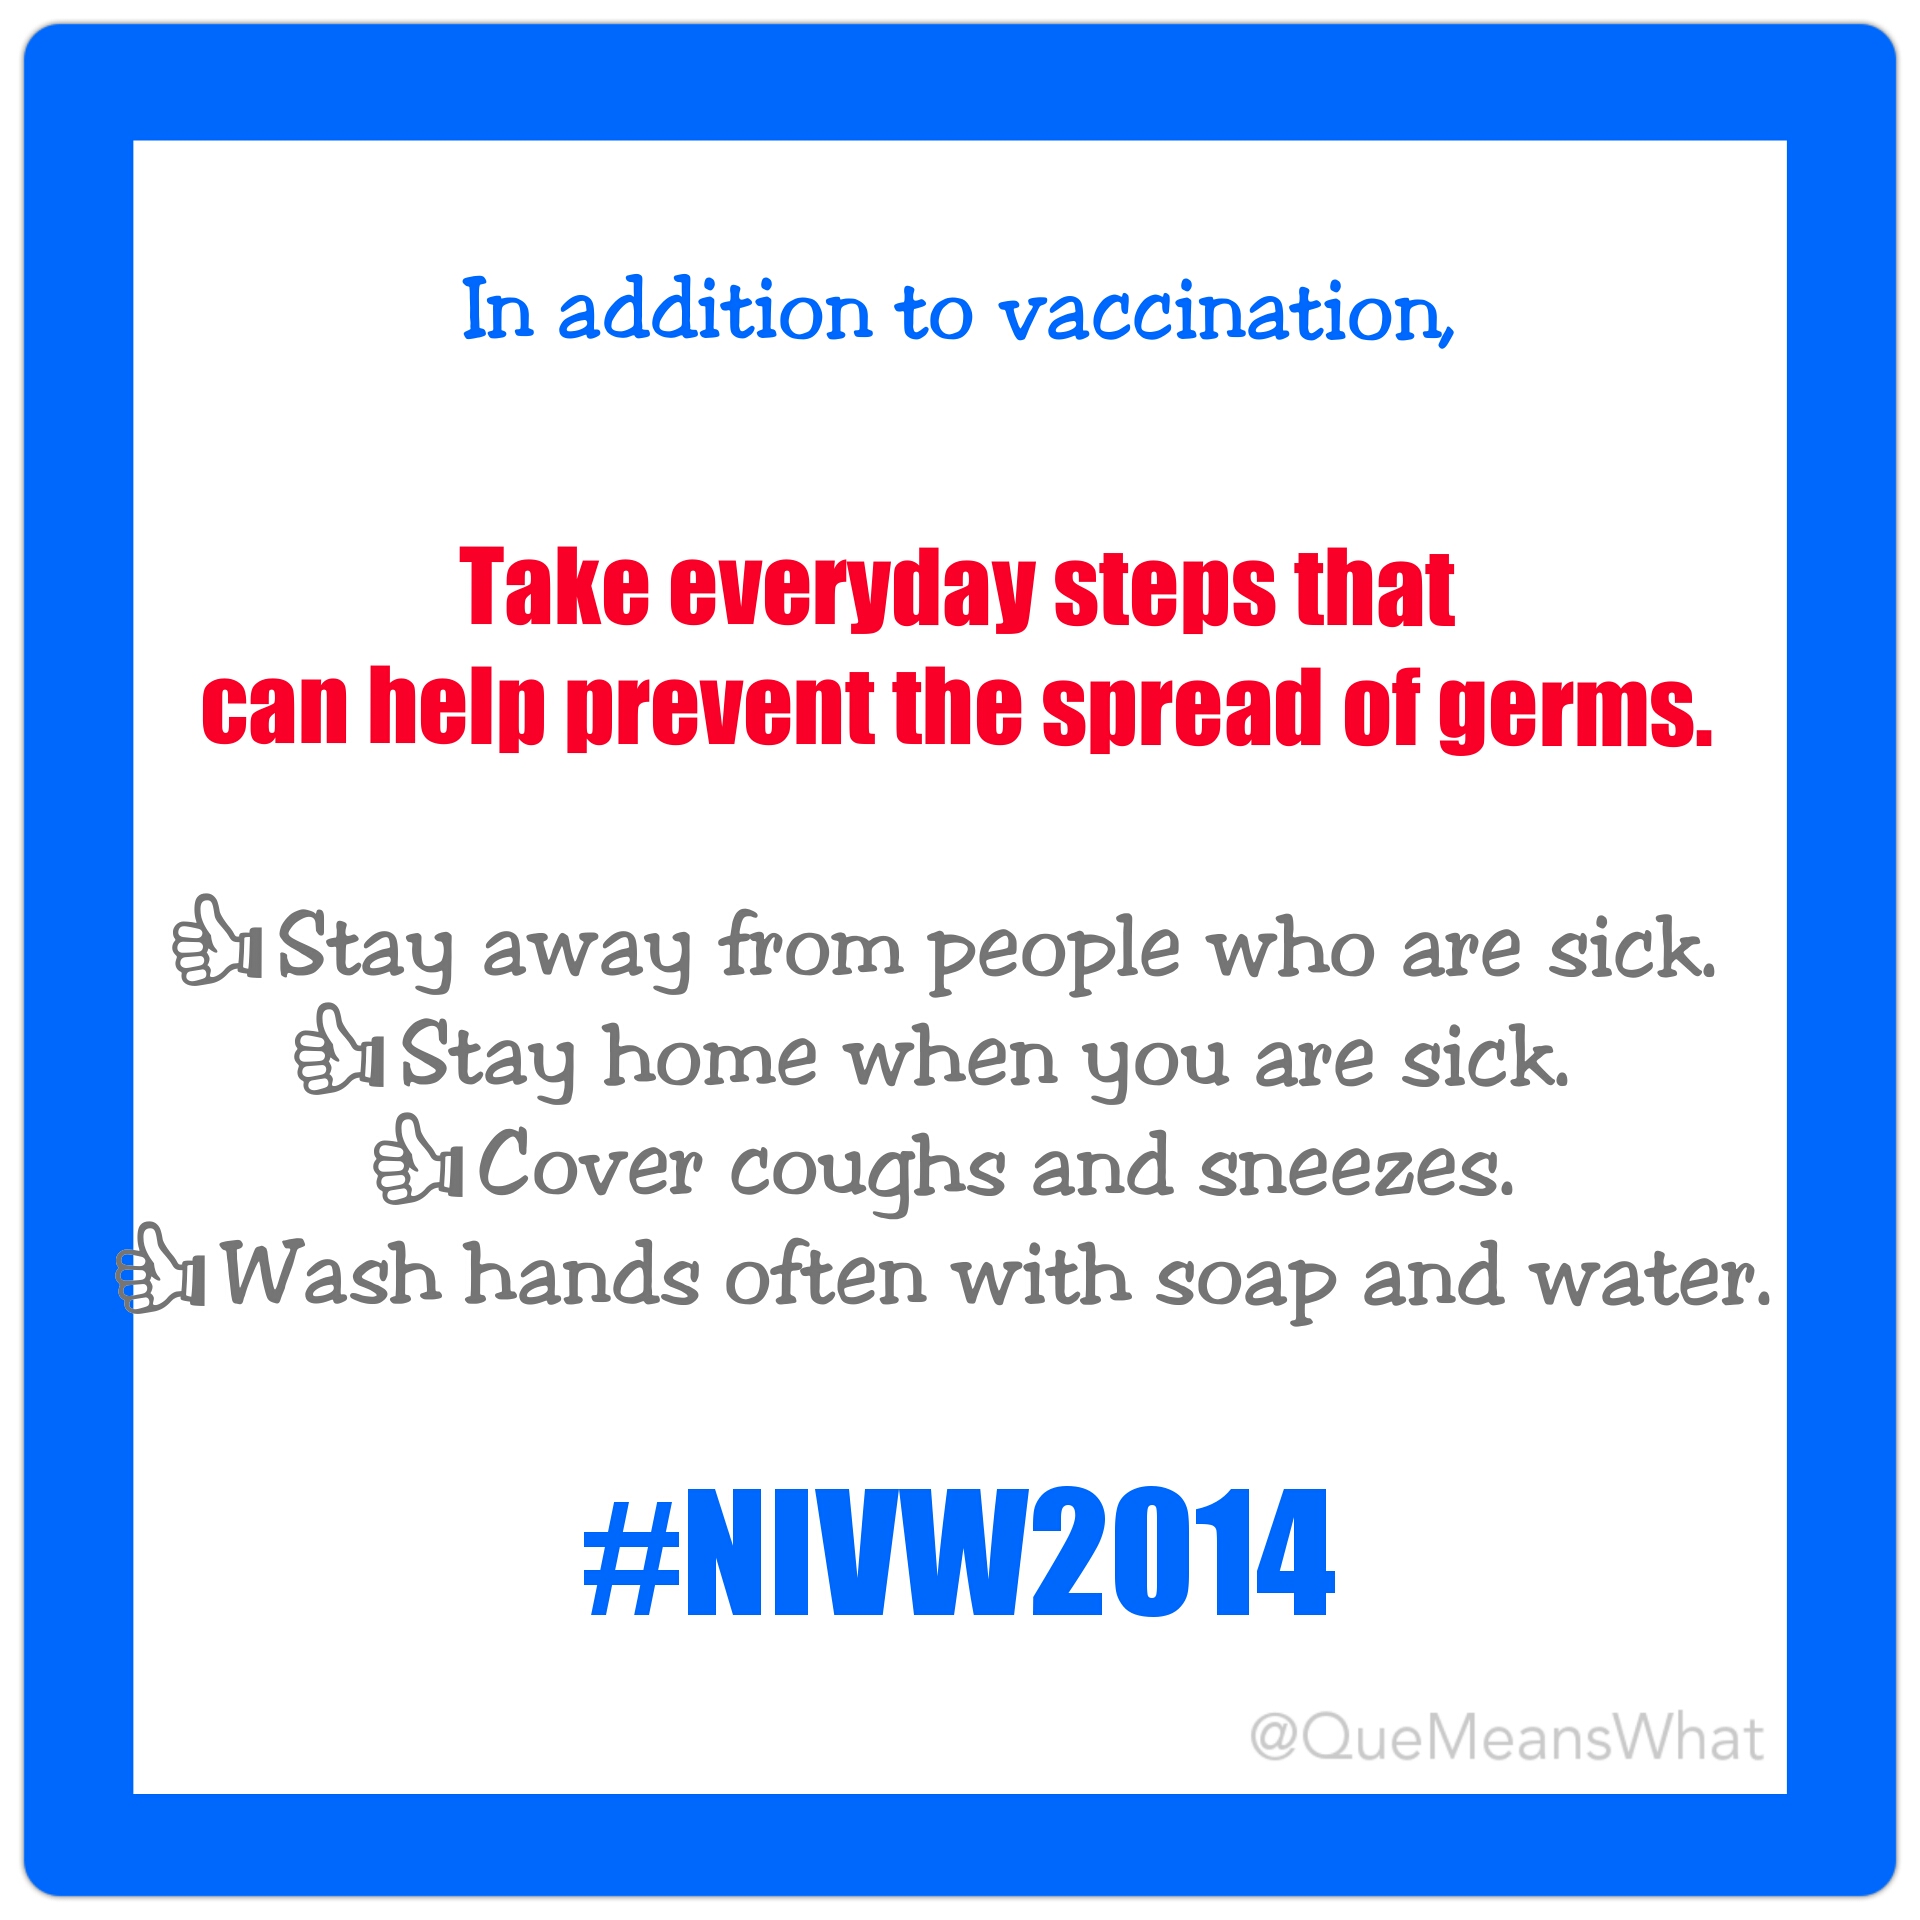 Take everyday steps that can help prevent the spread of germs. #NIVW2014